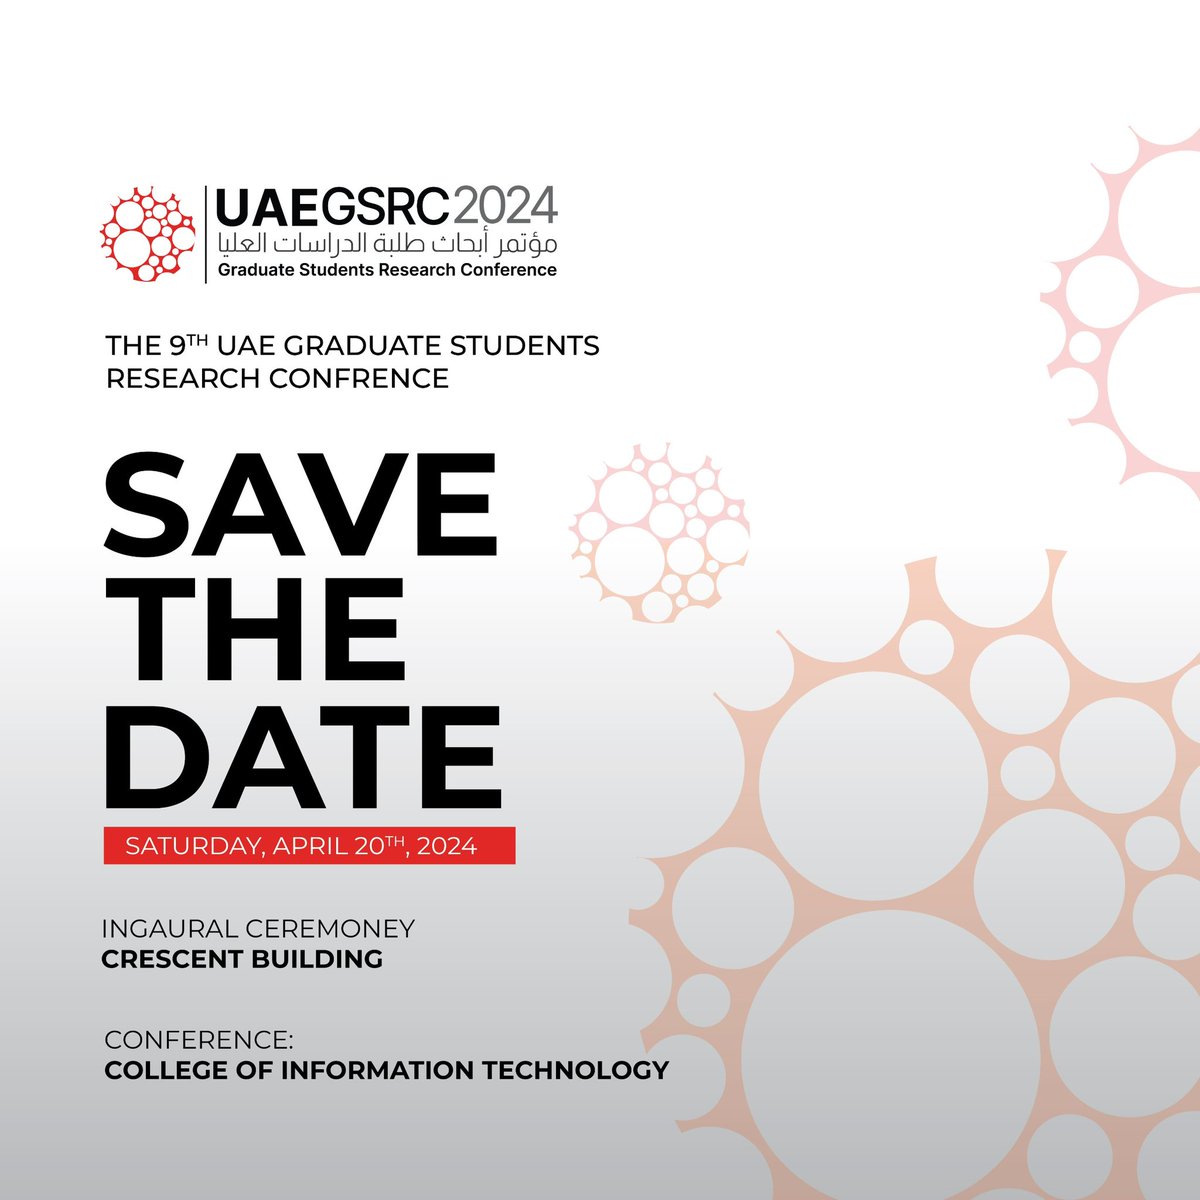 Join us at the 9th UAE Graduate Students Research Conference on April 20, 2024, at the United Arab Emirates University.
#UAEGSRC2024